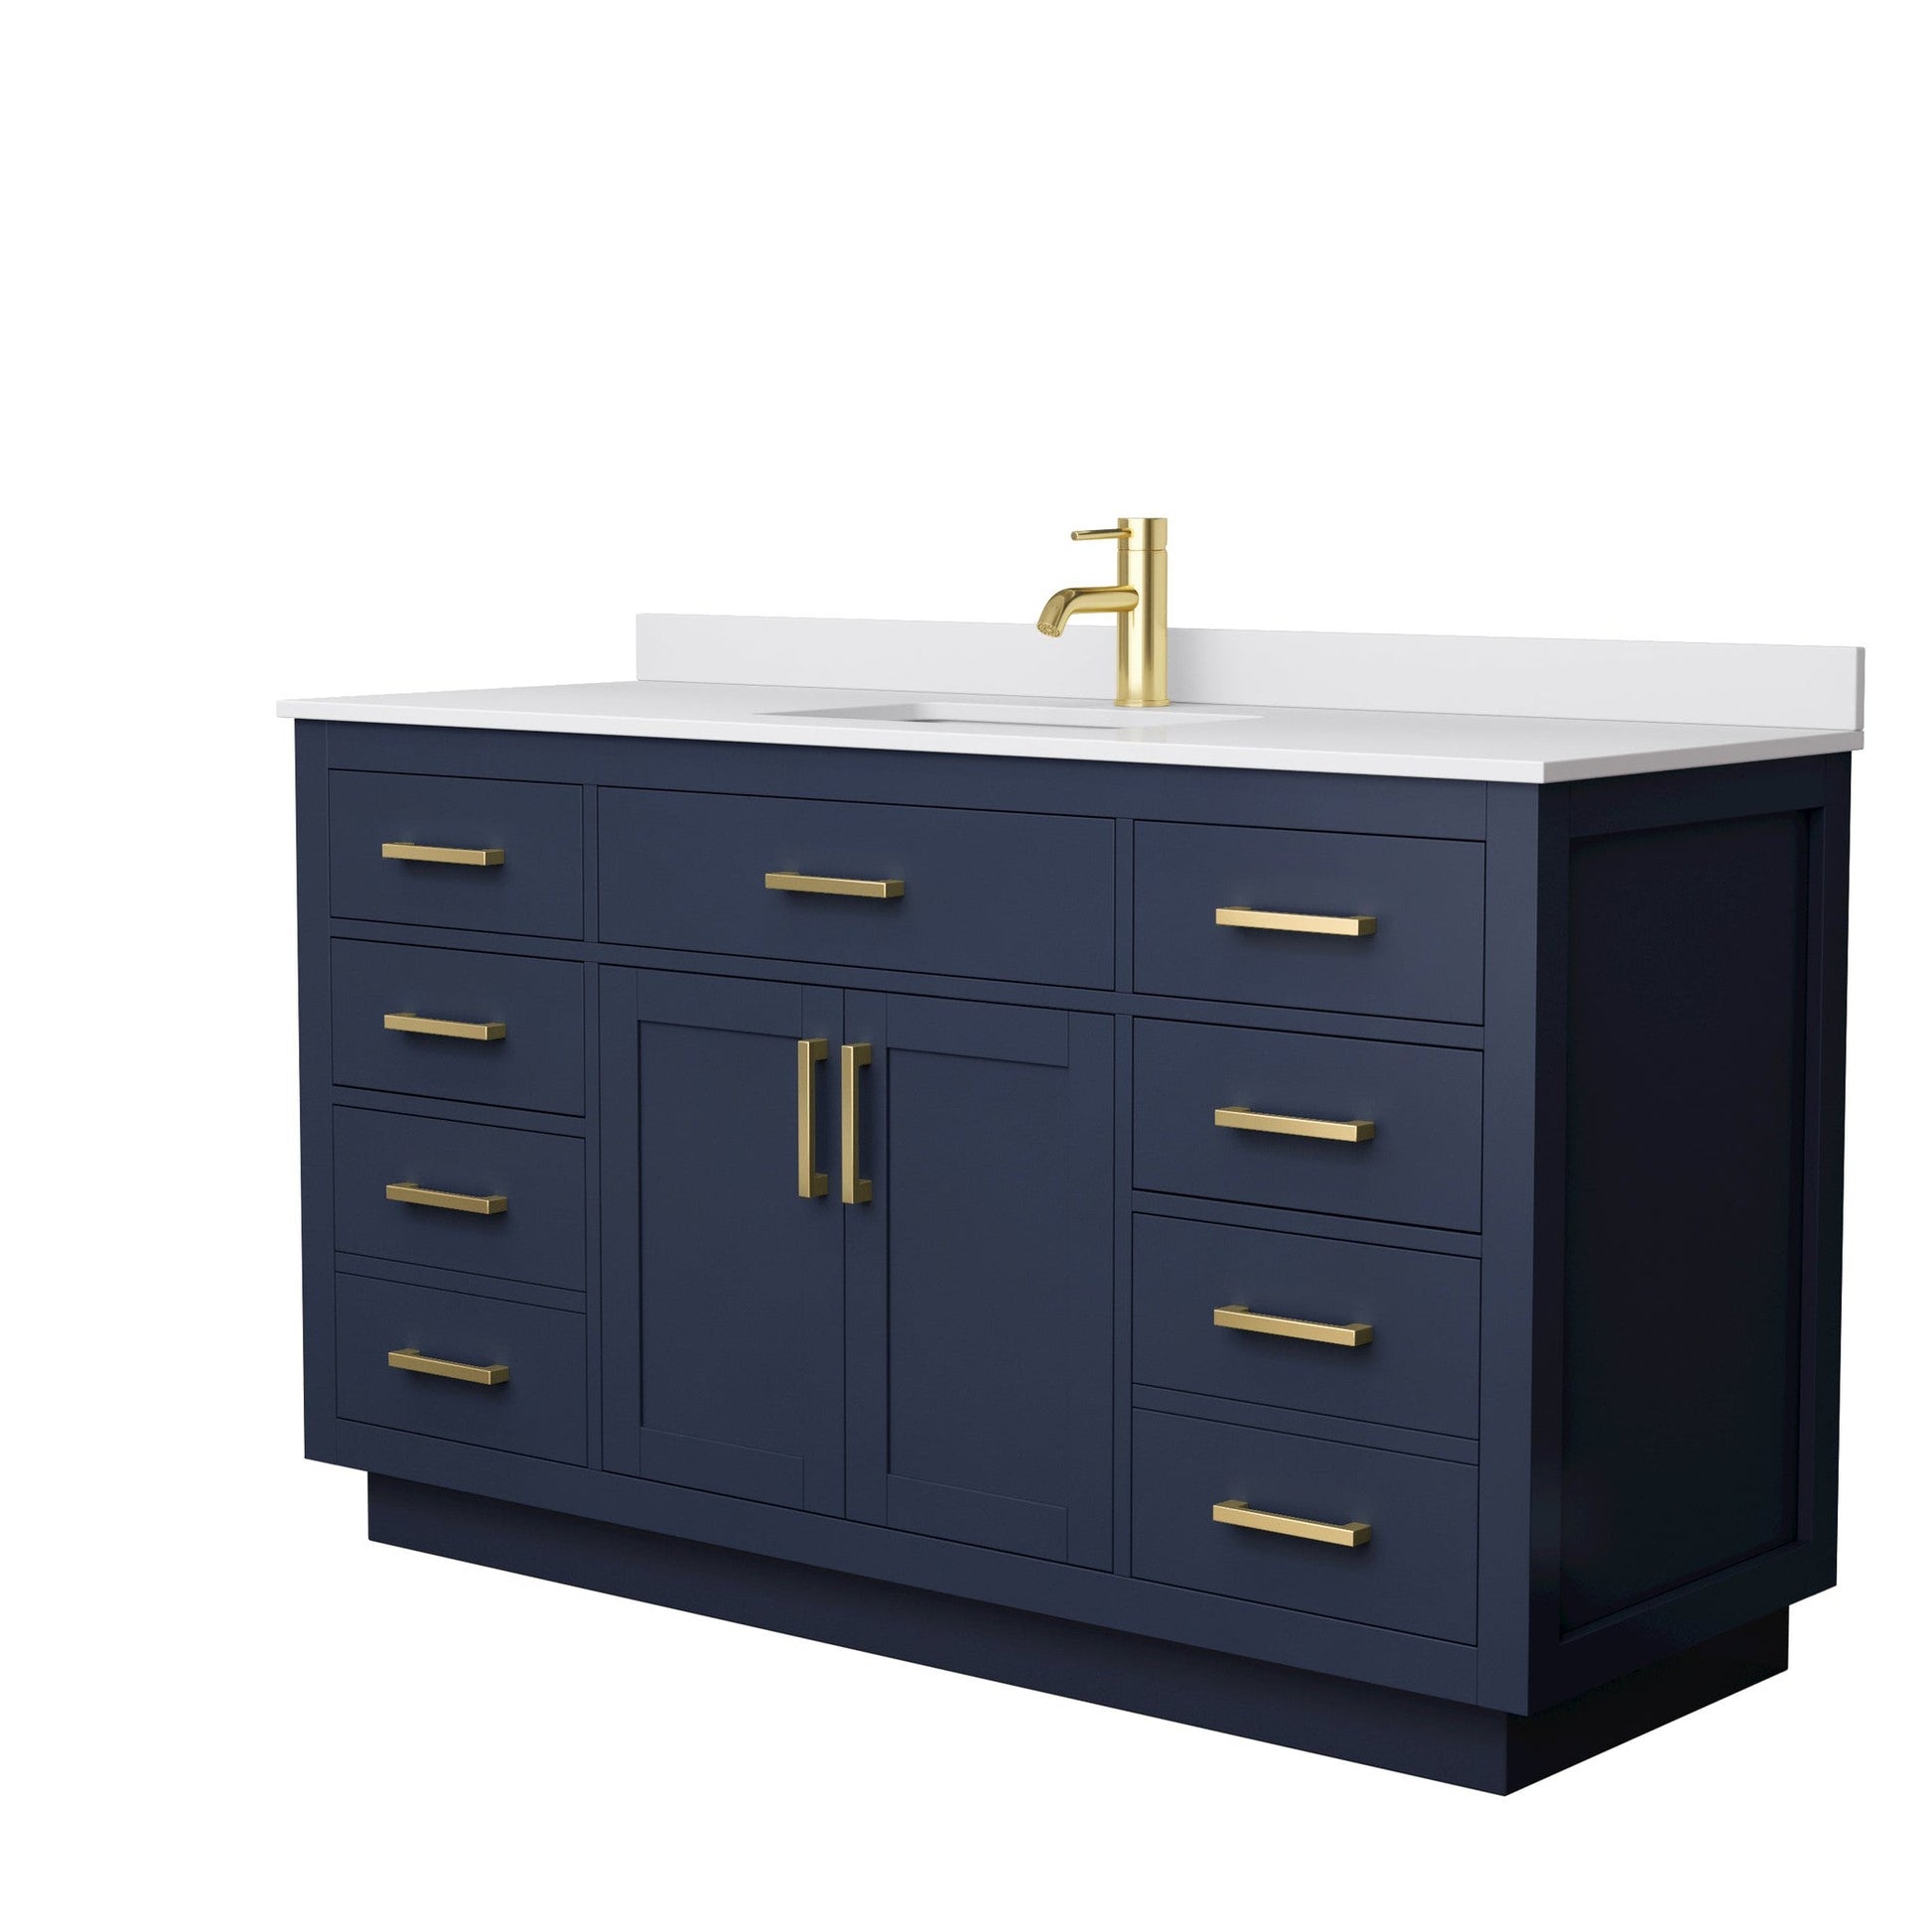 Beckett 60" Single Bathroom Vanity With Toe Kick in Dark Blue, White Cultured Marble Countertop, Undermount Square Sink, Brushed Gold Trim